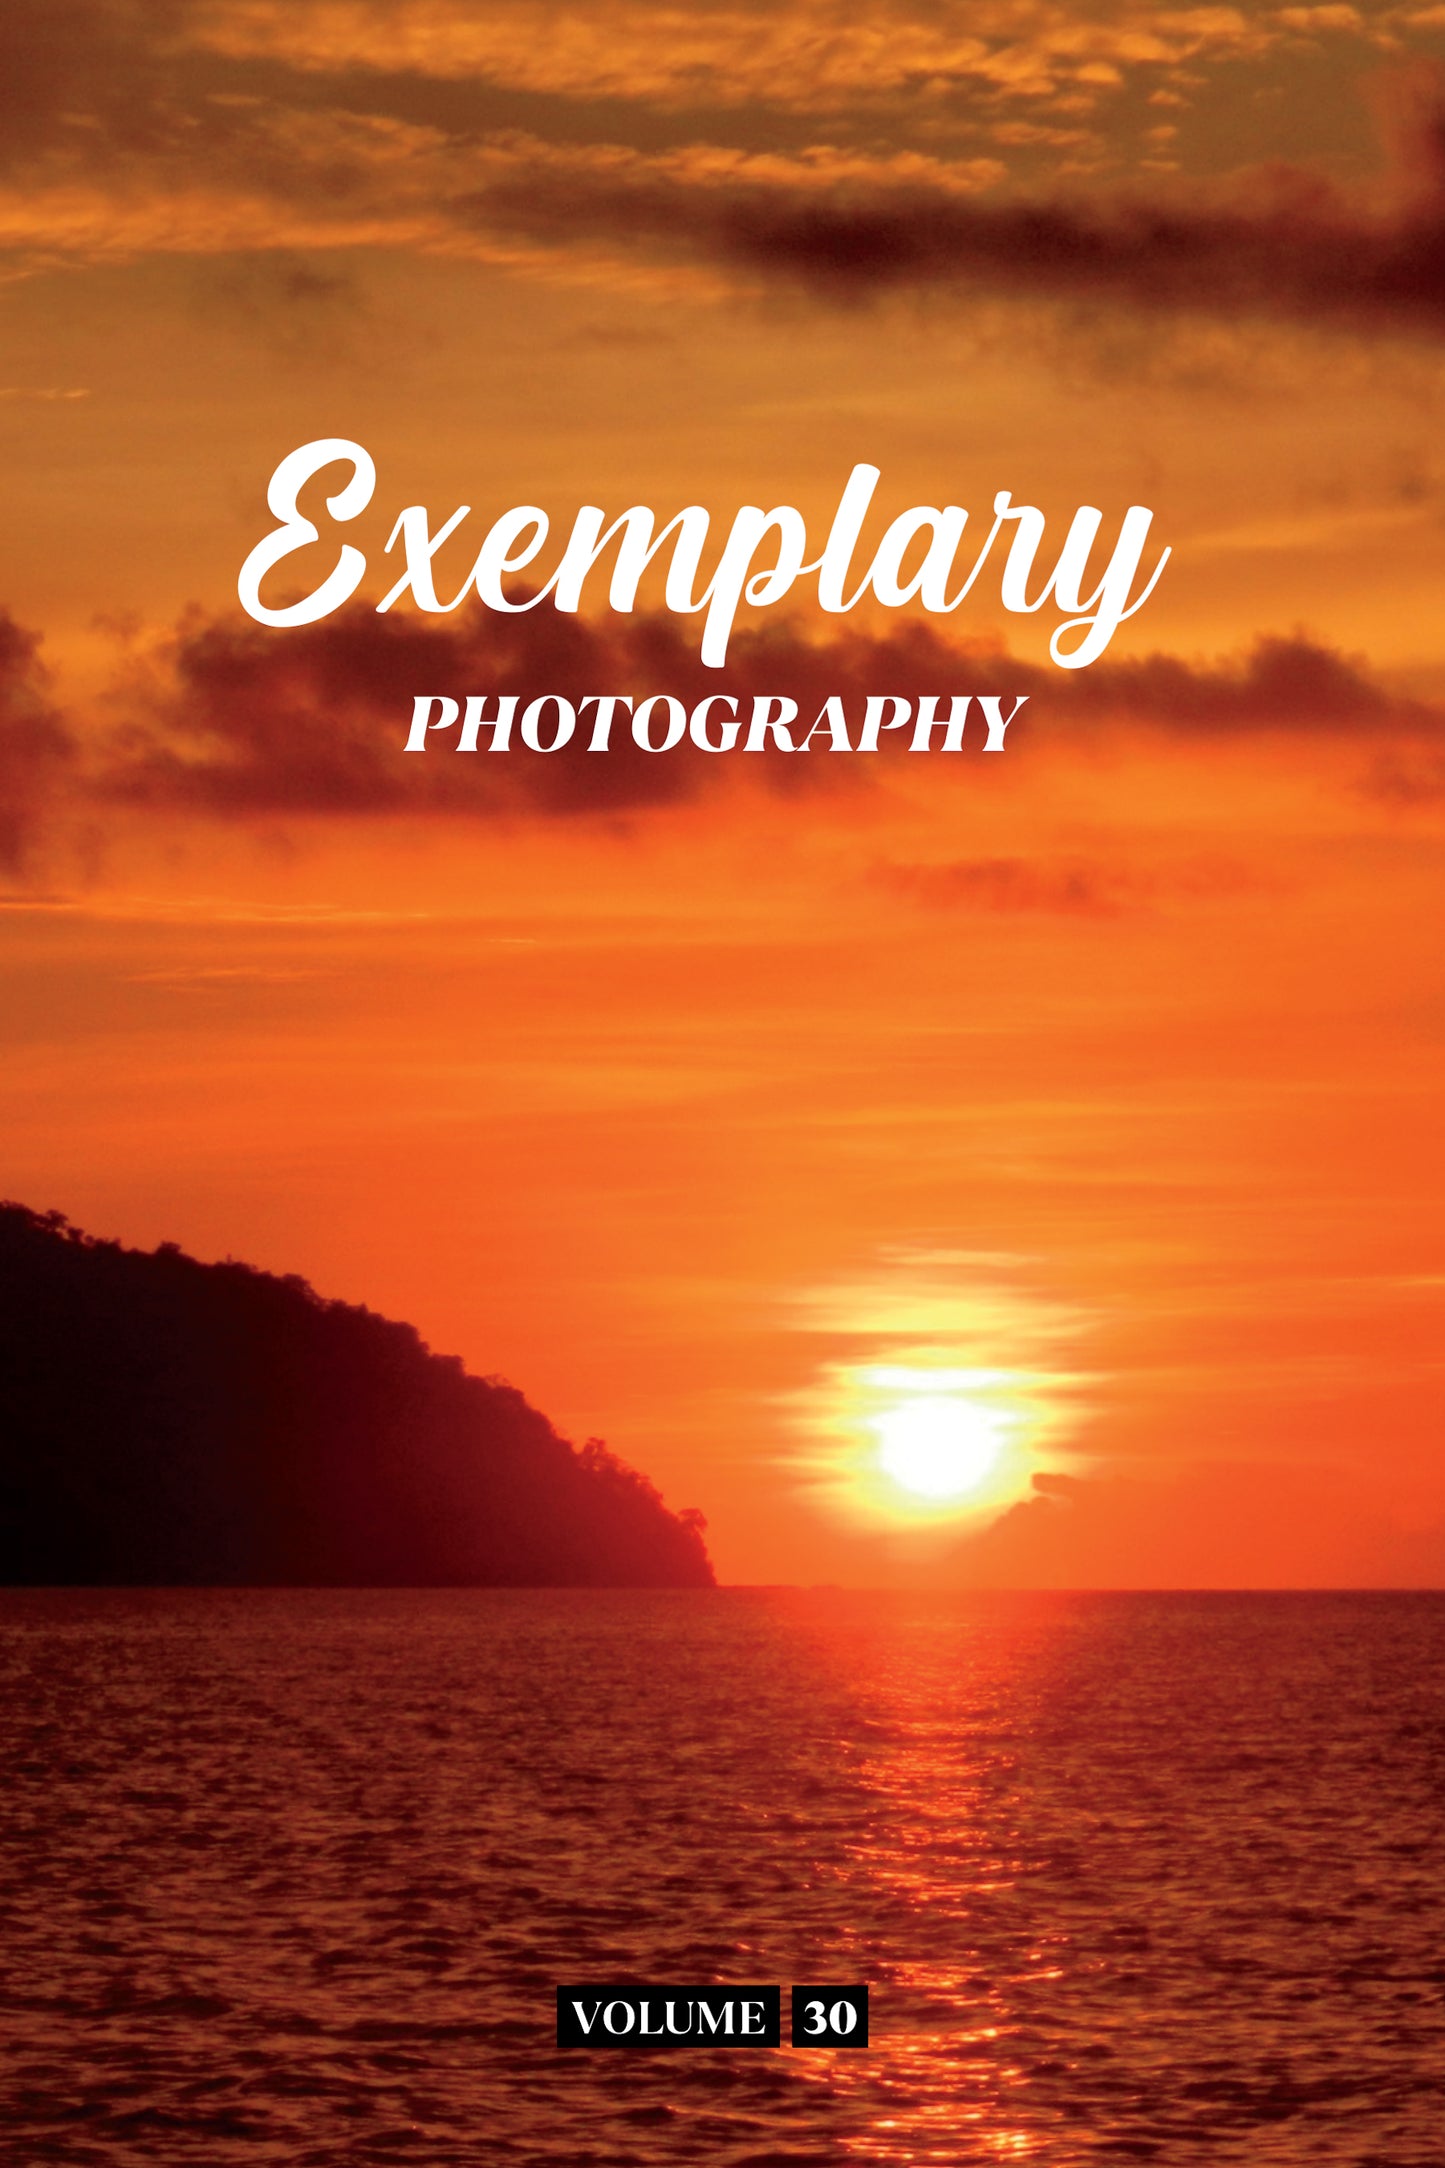 Exemplary Photography Volume 30 (Physical Book Pre-Order)